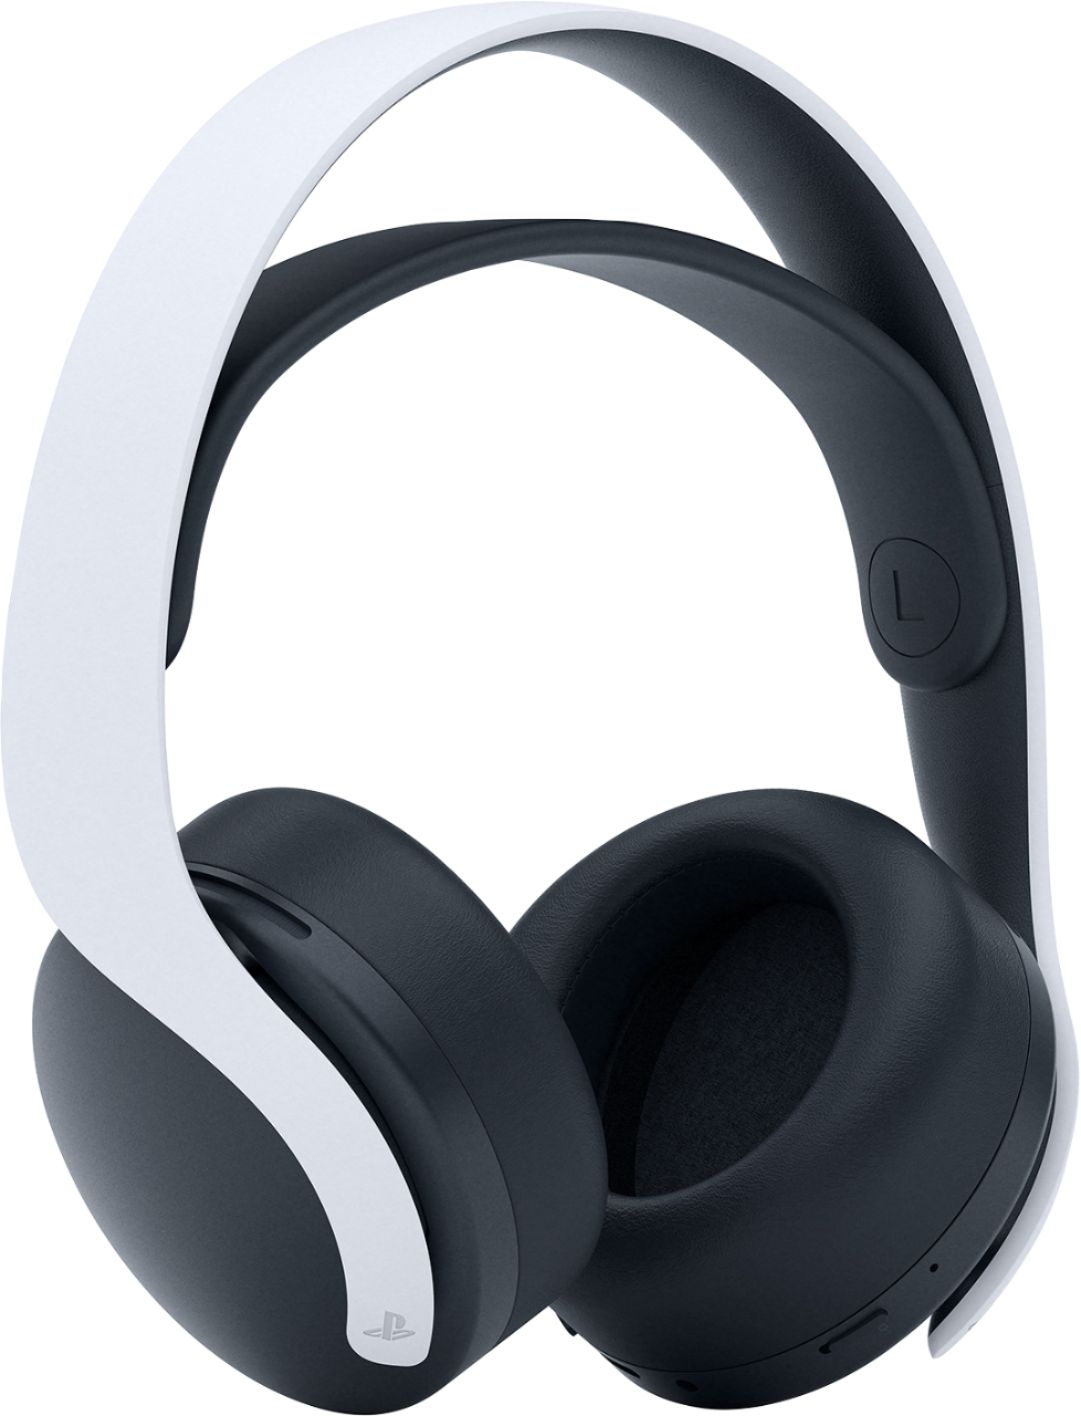 dukke vedhæng Derivation Sony PULSE 3D Wireless Gaming Headset for PS5, PS4, and PC White 3005688 -  Best Buy